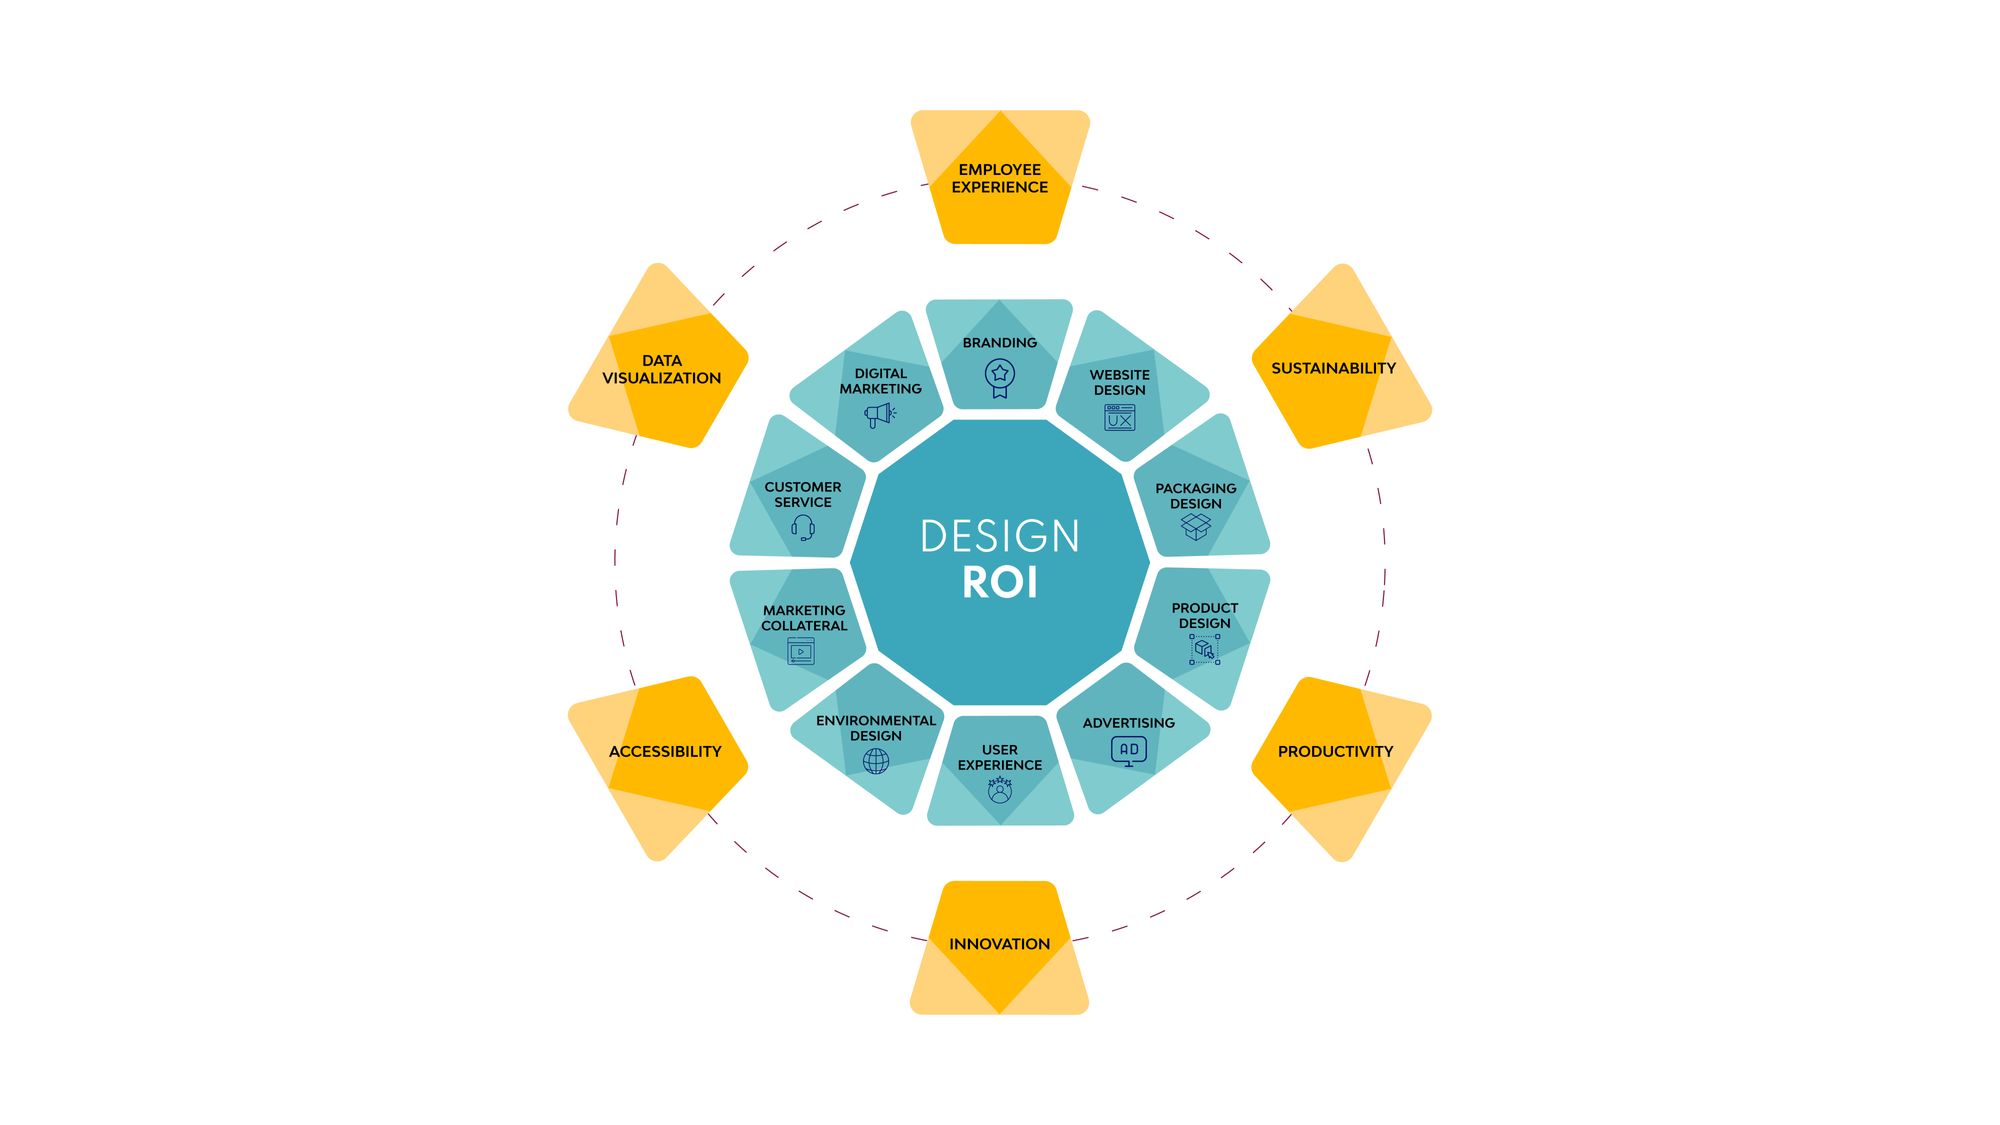 Design-Driven ROI: 10 Key Business Areas That Can Boost Your Returns